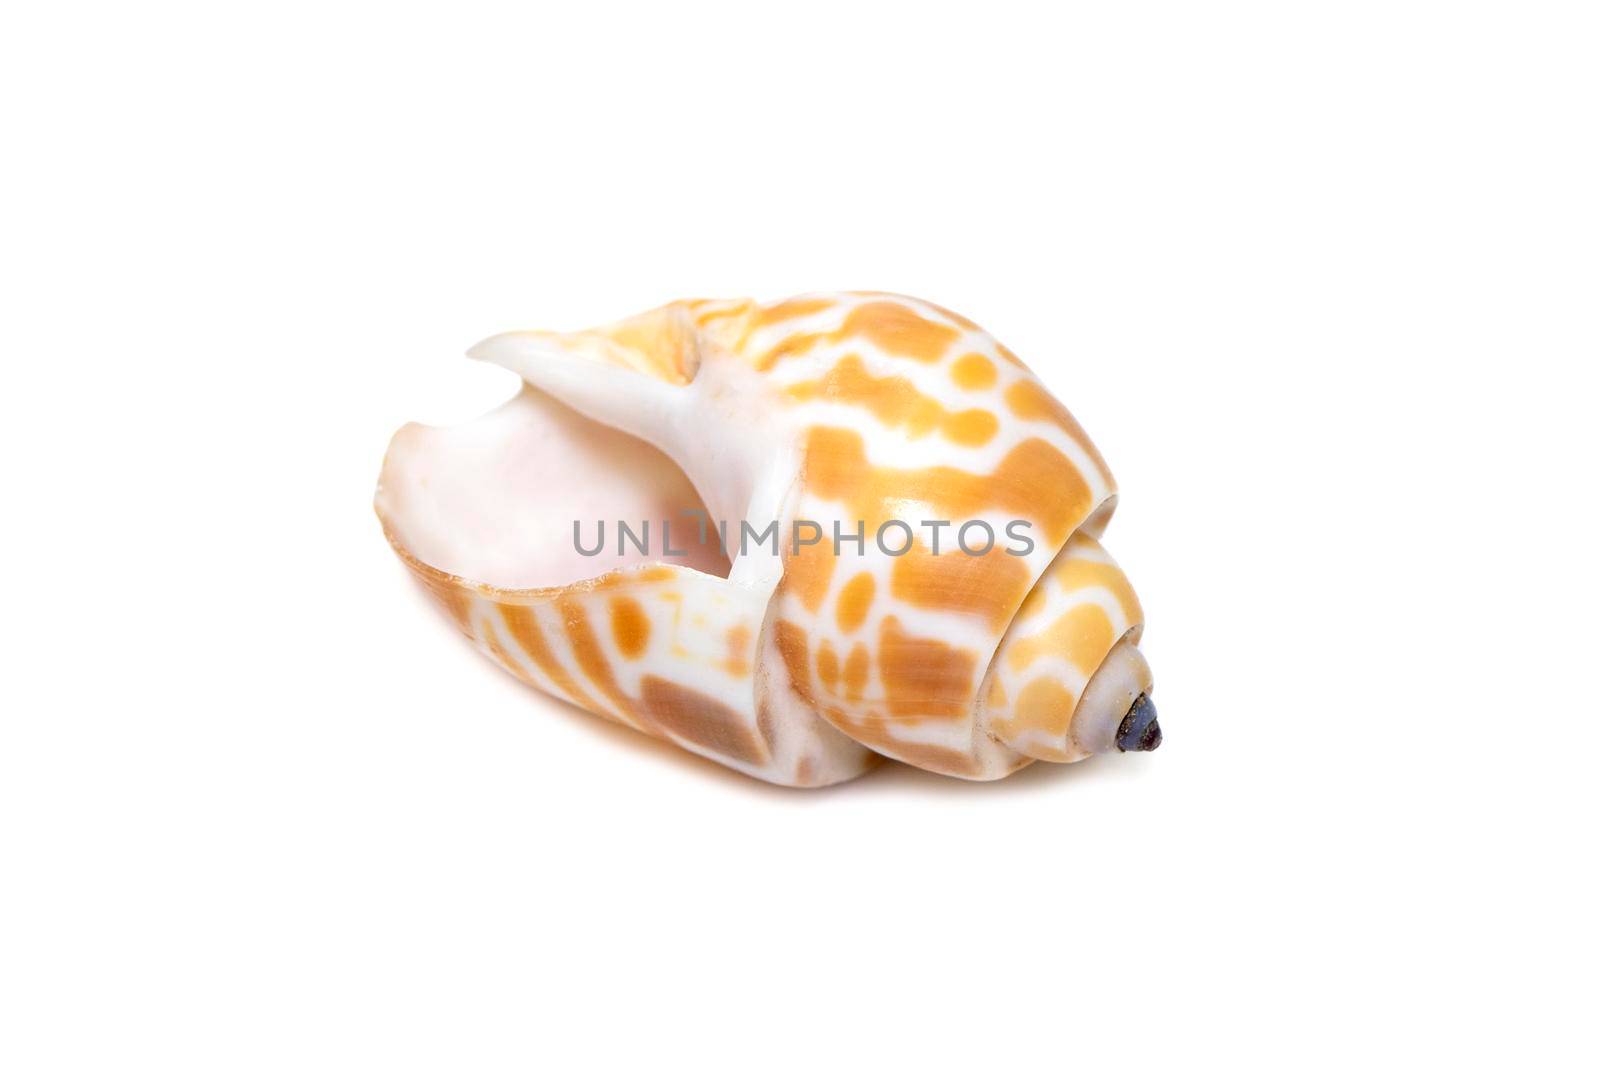 Image of babylonia spirata, common name the Spiral Babylon, is a species of sea snail, a marine gastropod mollusk, in the family Babyloniidae isolated on white background. Sea snail. Undersea Animals. Sea Shells. by yod67